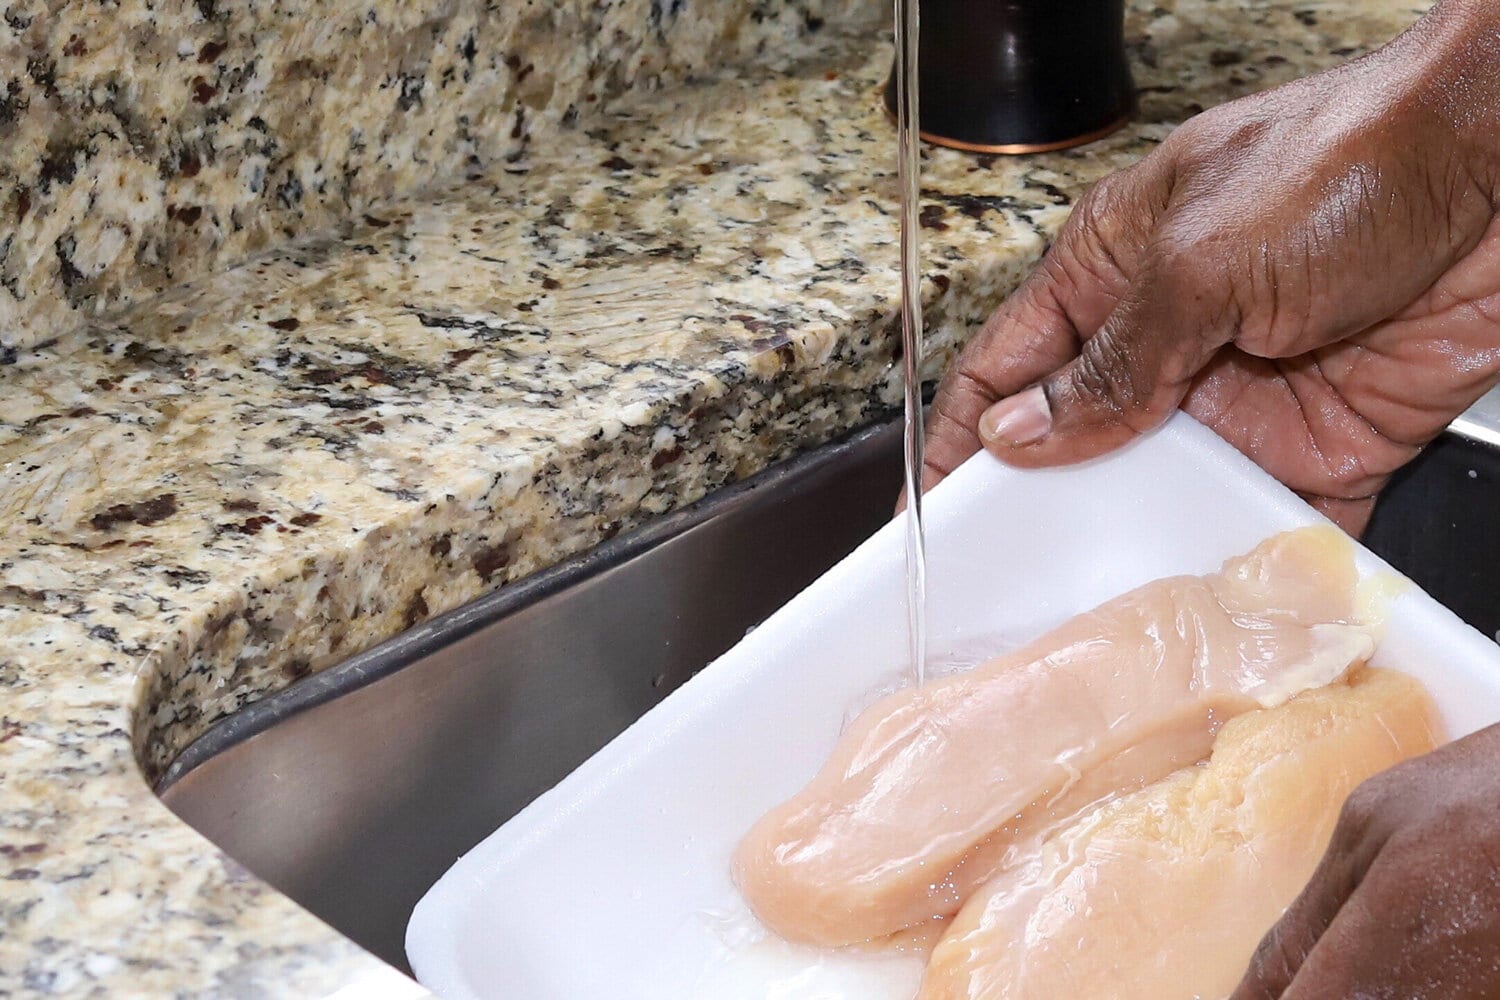 A close up image of a African-American man hands cleaning organic chicken breast in a kitchen sinku